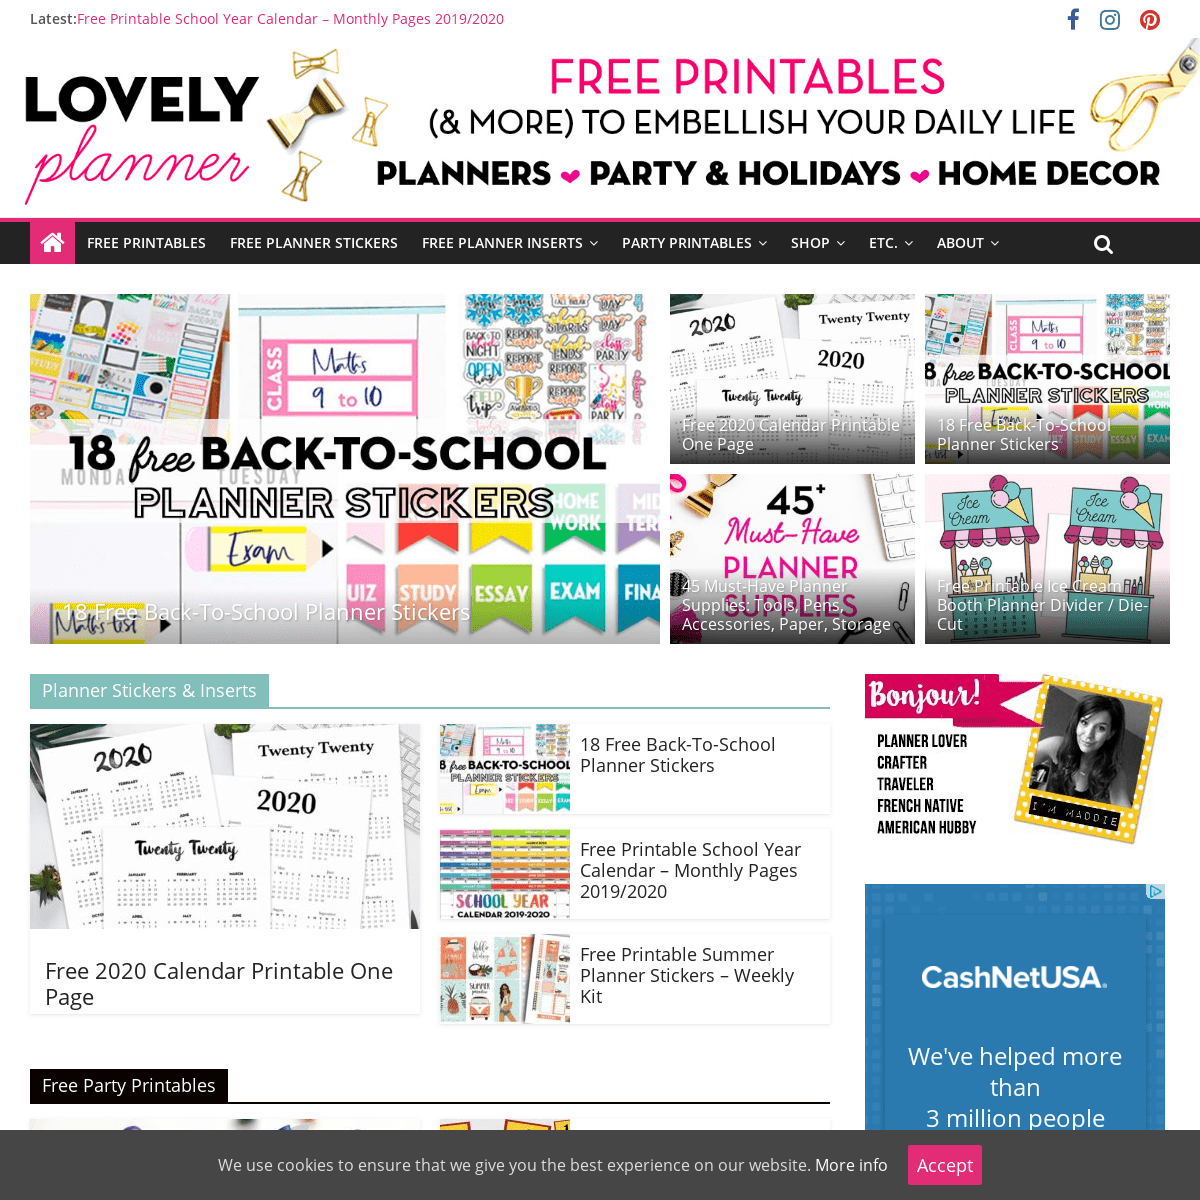 Lovely Planner - Free printables : party printables, planner stickers, lettering, DIY and more!